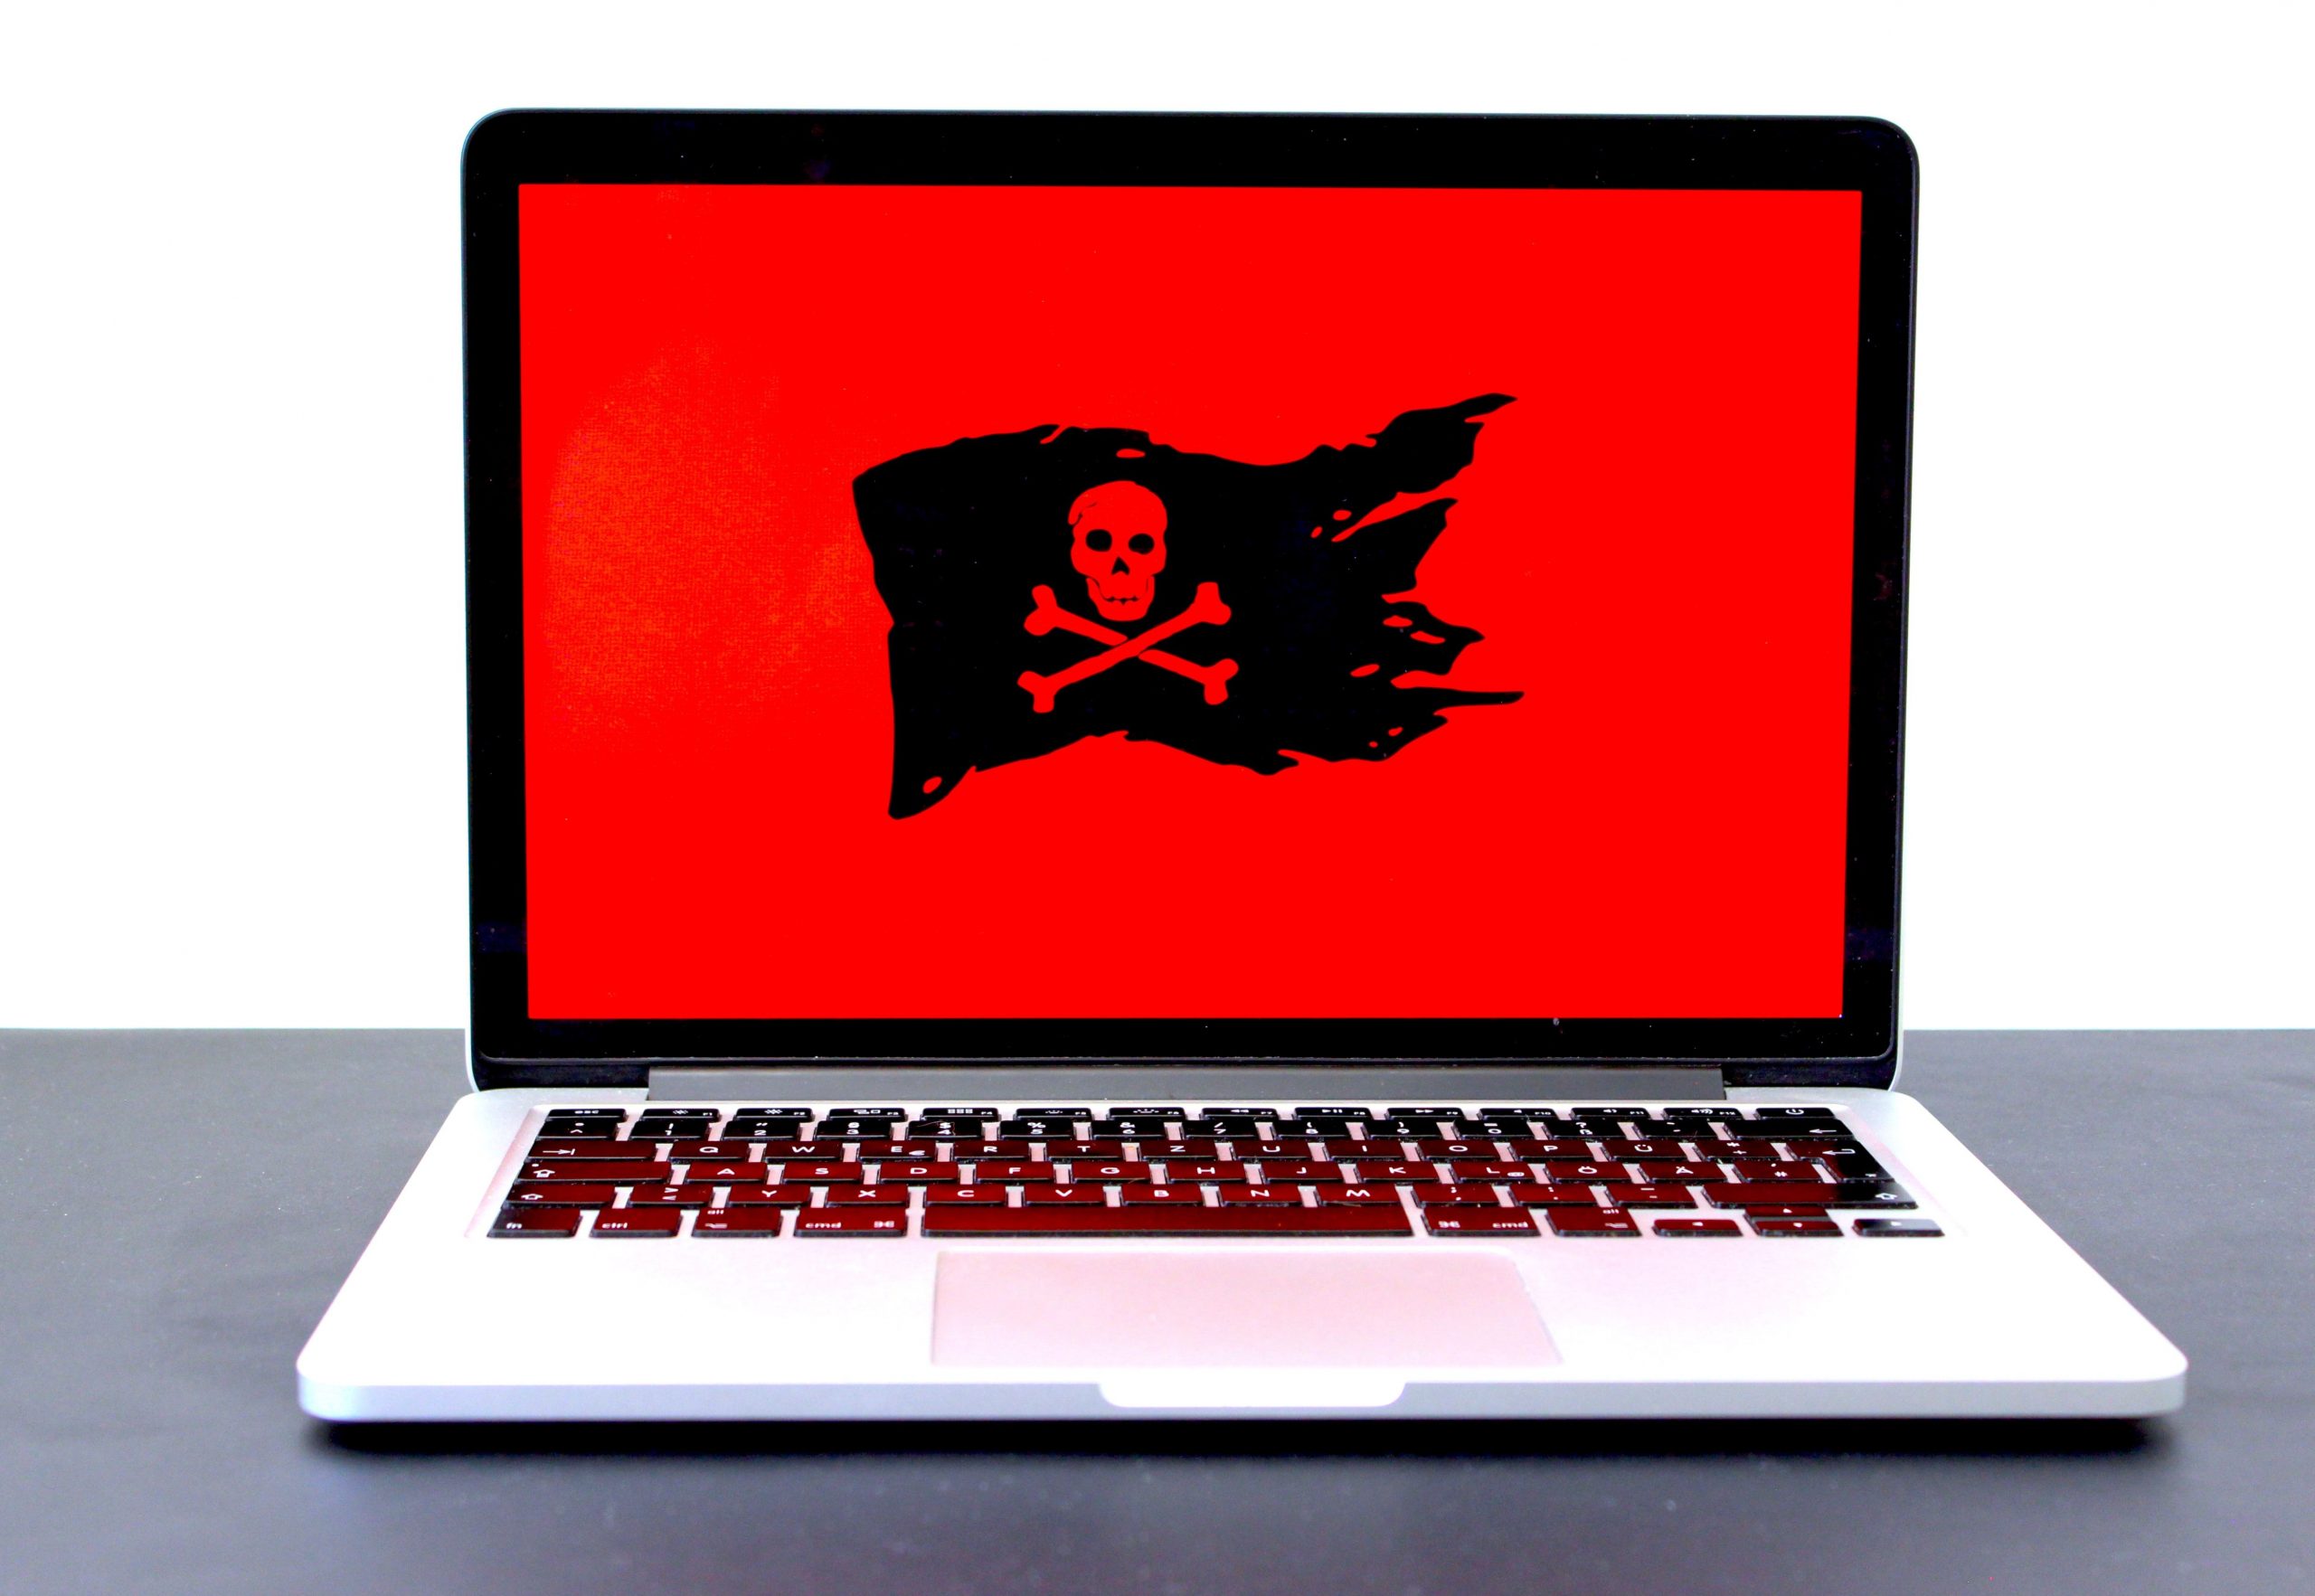 Notorious ransomware gang mysteriously disappears from the internet